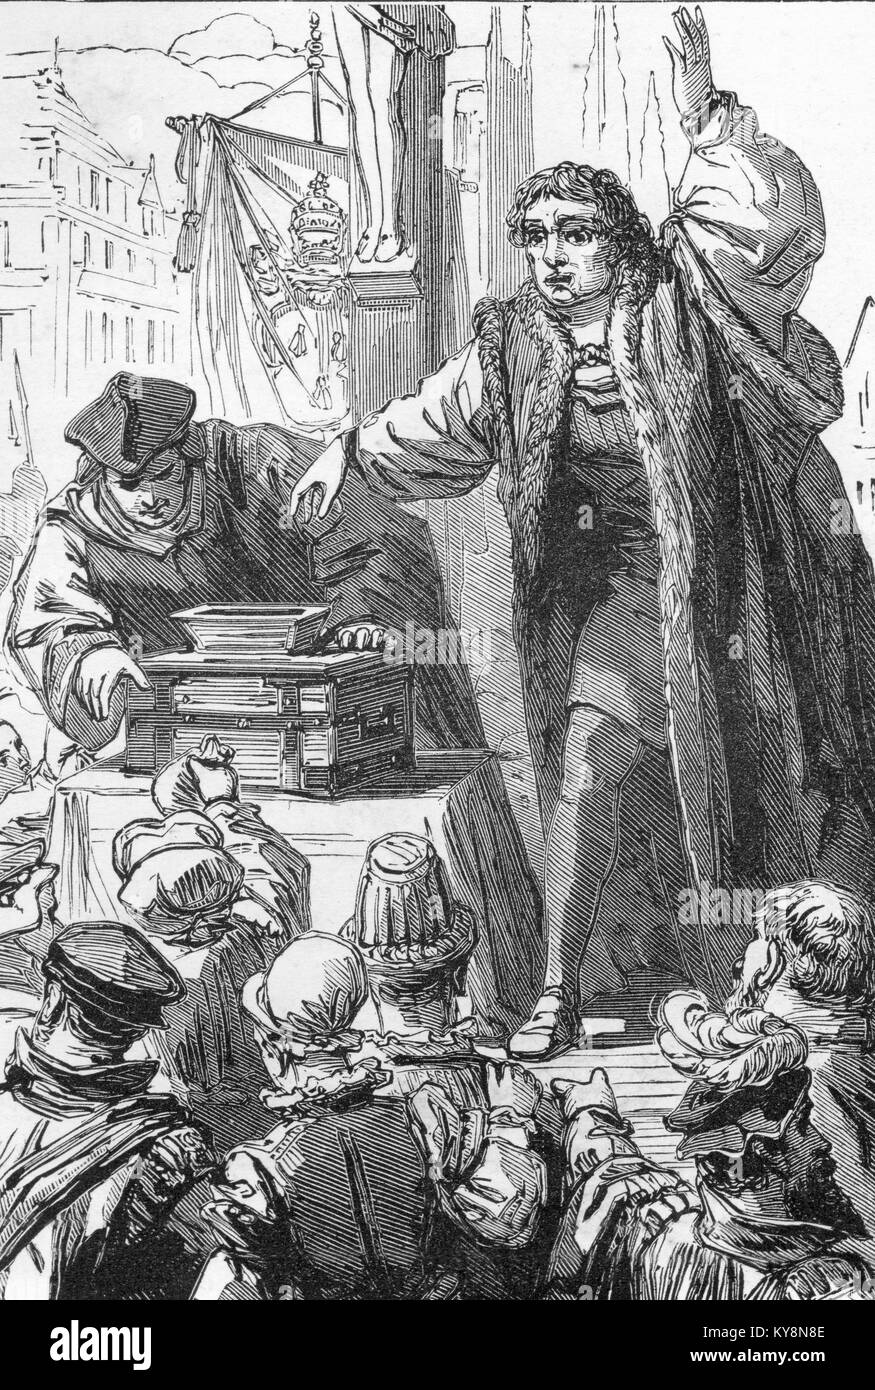 Line drawing of Tetzel selling indulgenses, the incident that prompted Martin Luther to challenge the Roman Catholic Church in 1517. Stock Photo